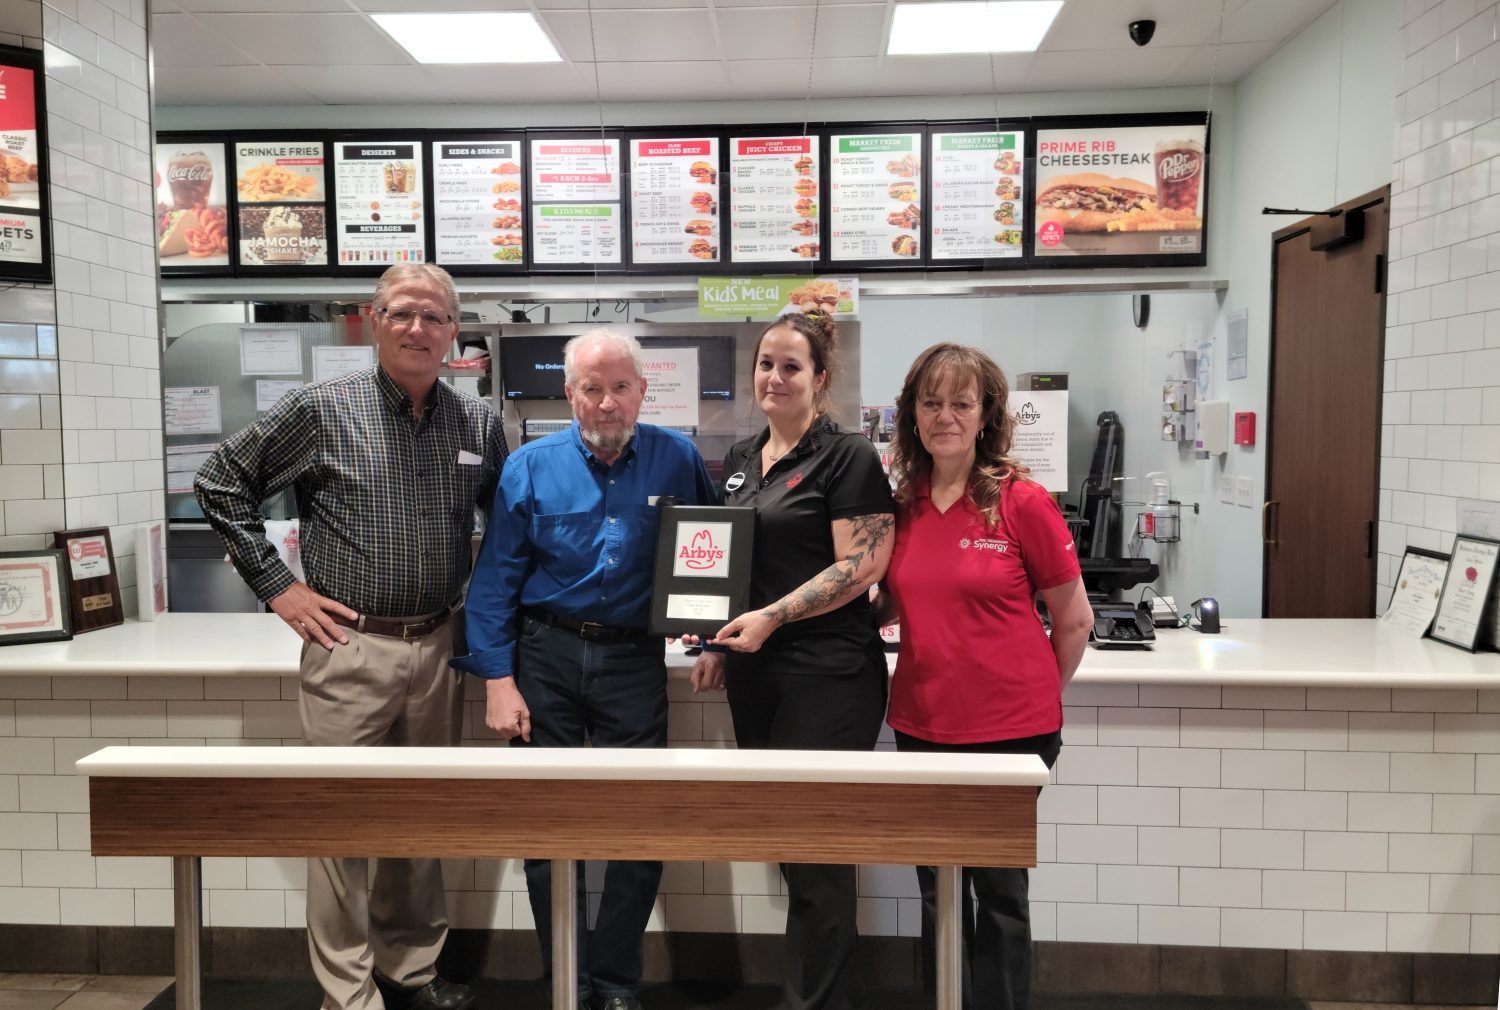 Arby’s receives Award for the Highest Sales Increase